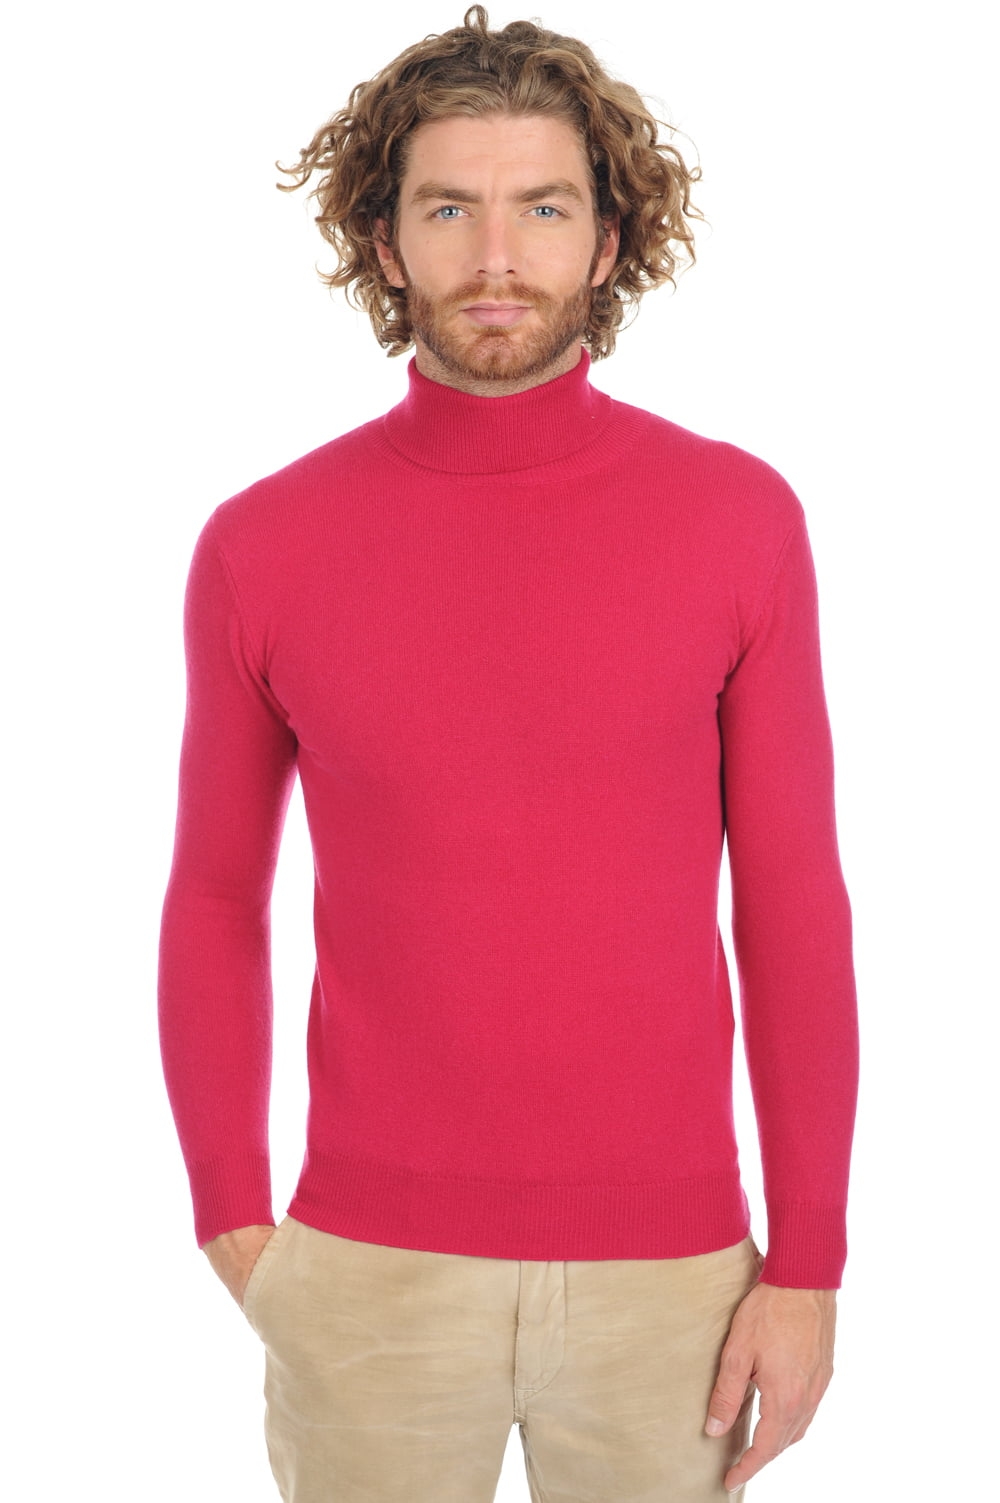 Cachemire pull homme tarry first red fuschsia xl